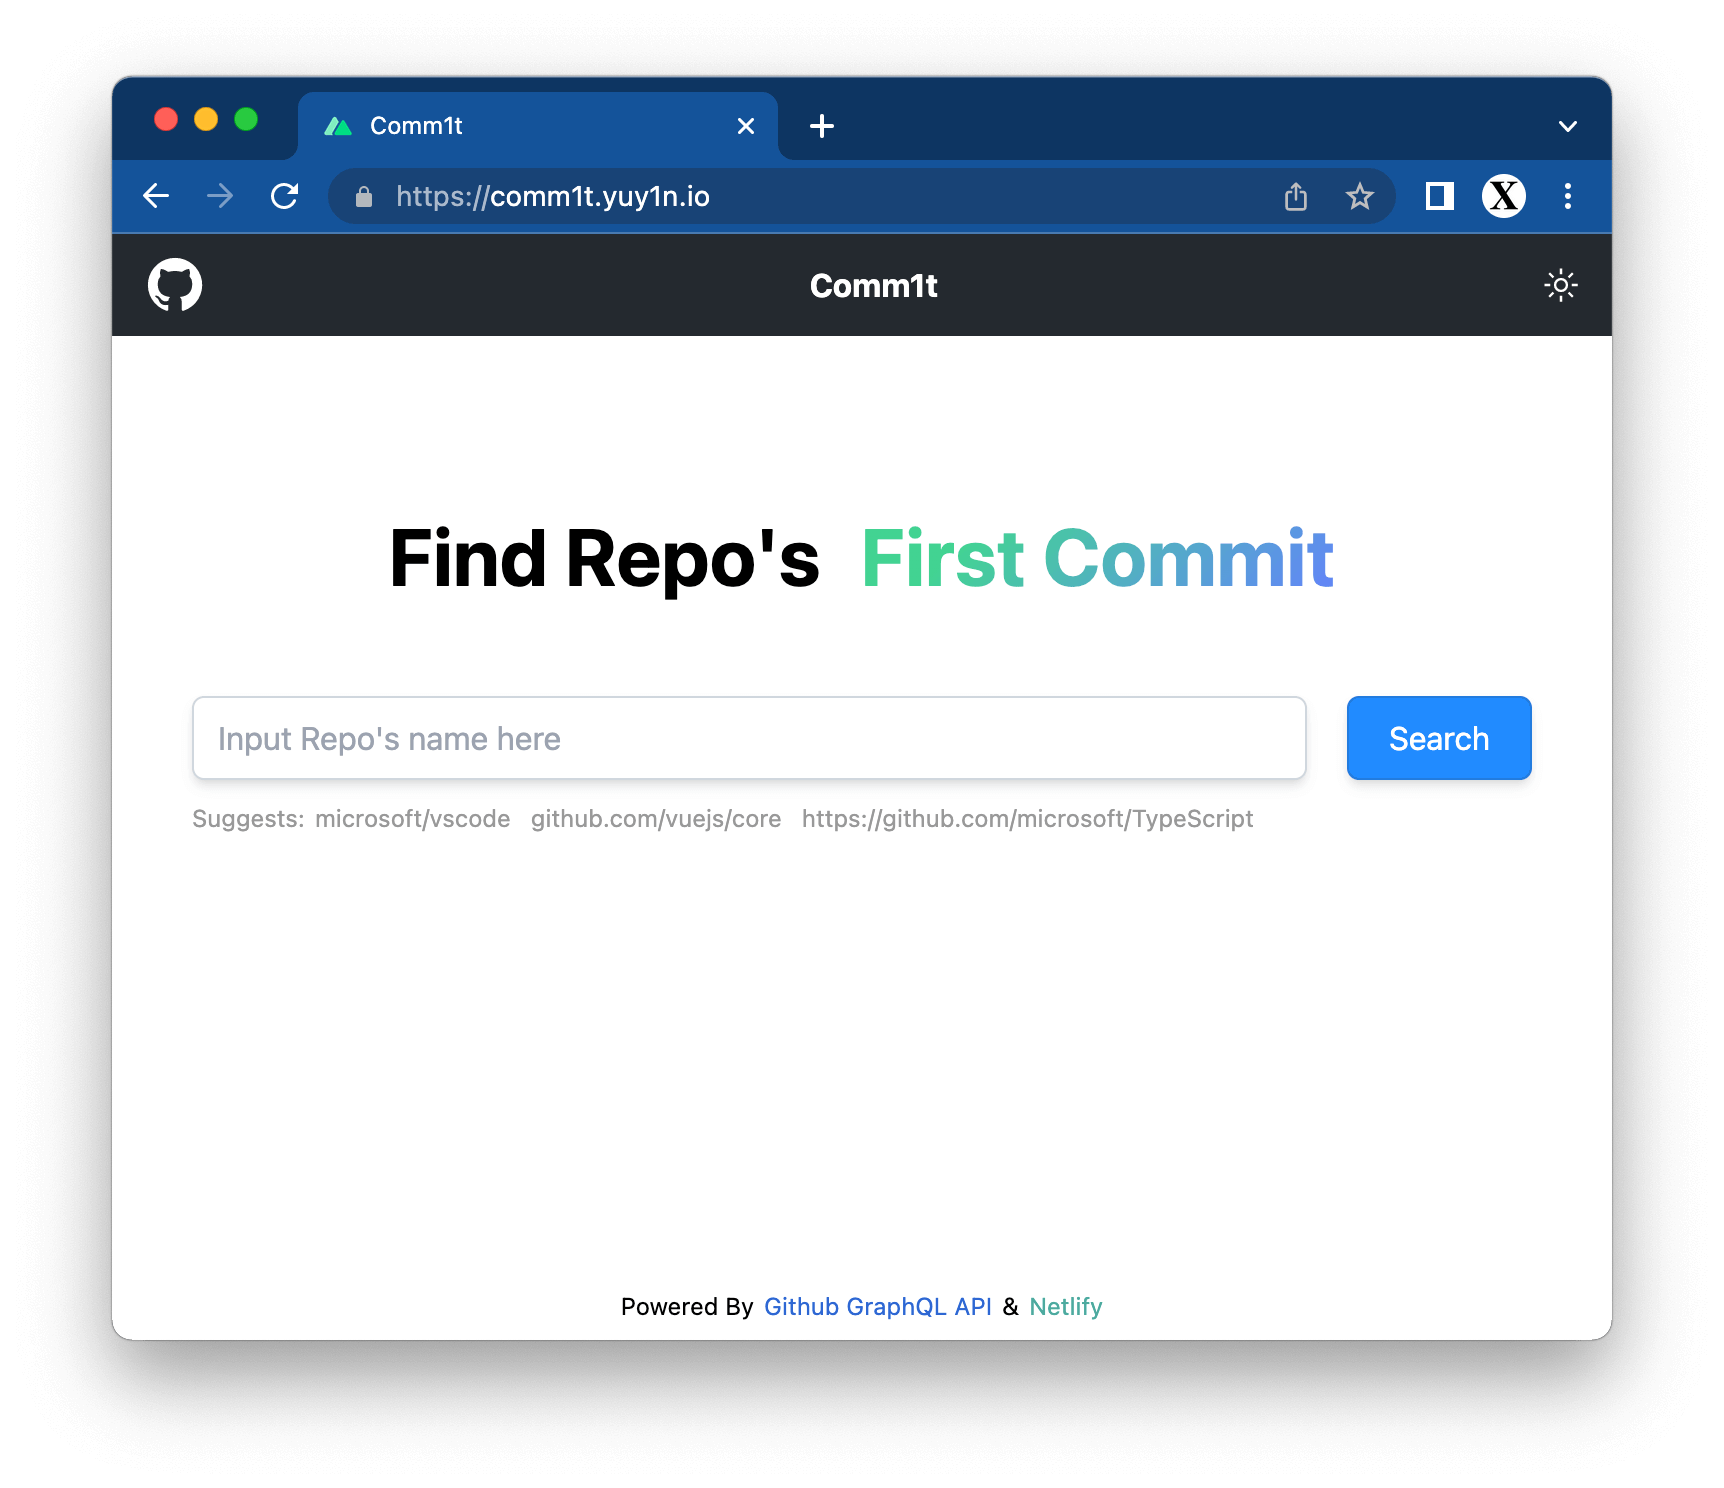 Comm1t - Find Repo's First Commit